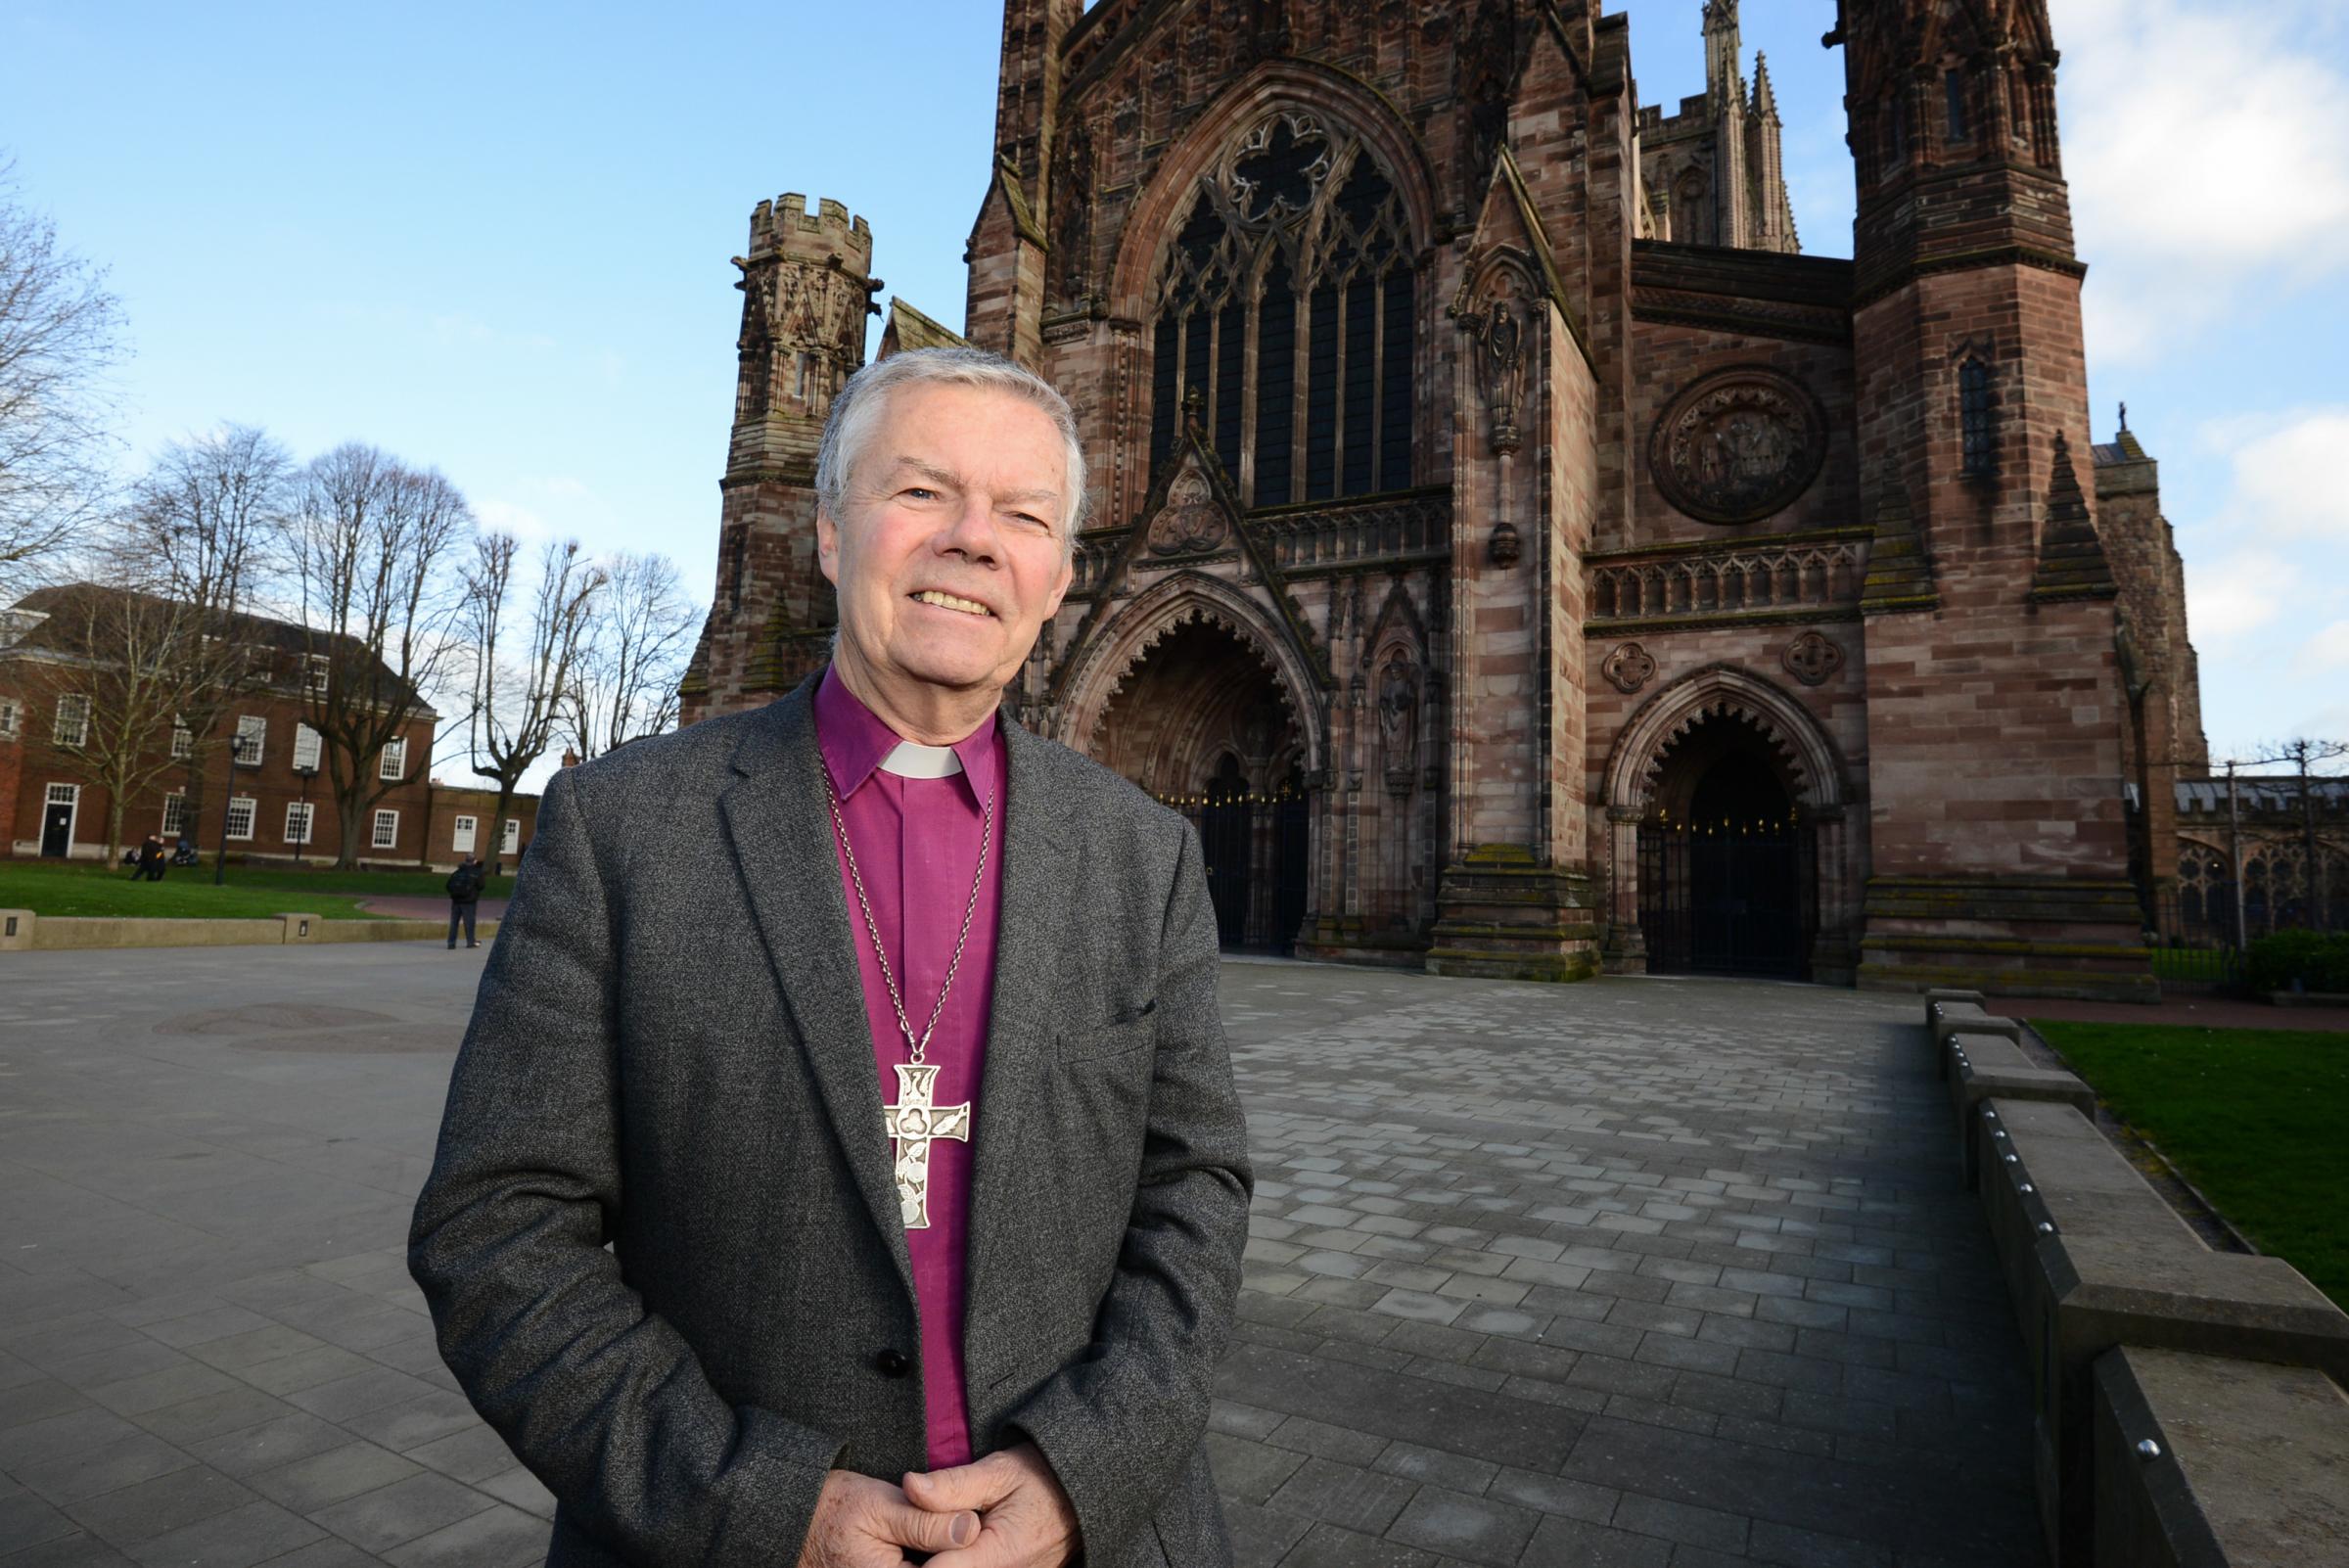 Final public appearance for Bishop of Hereford